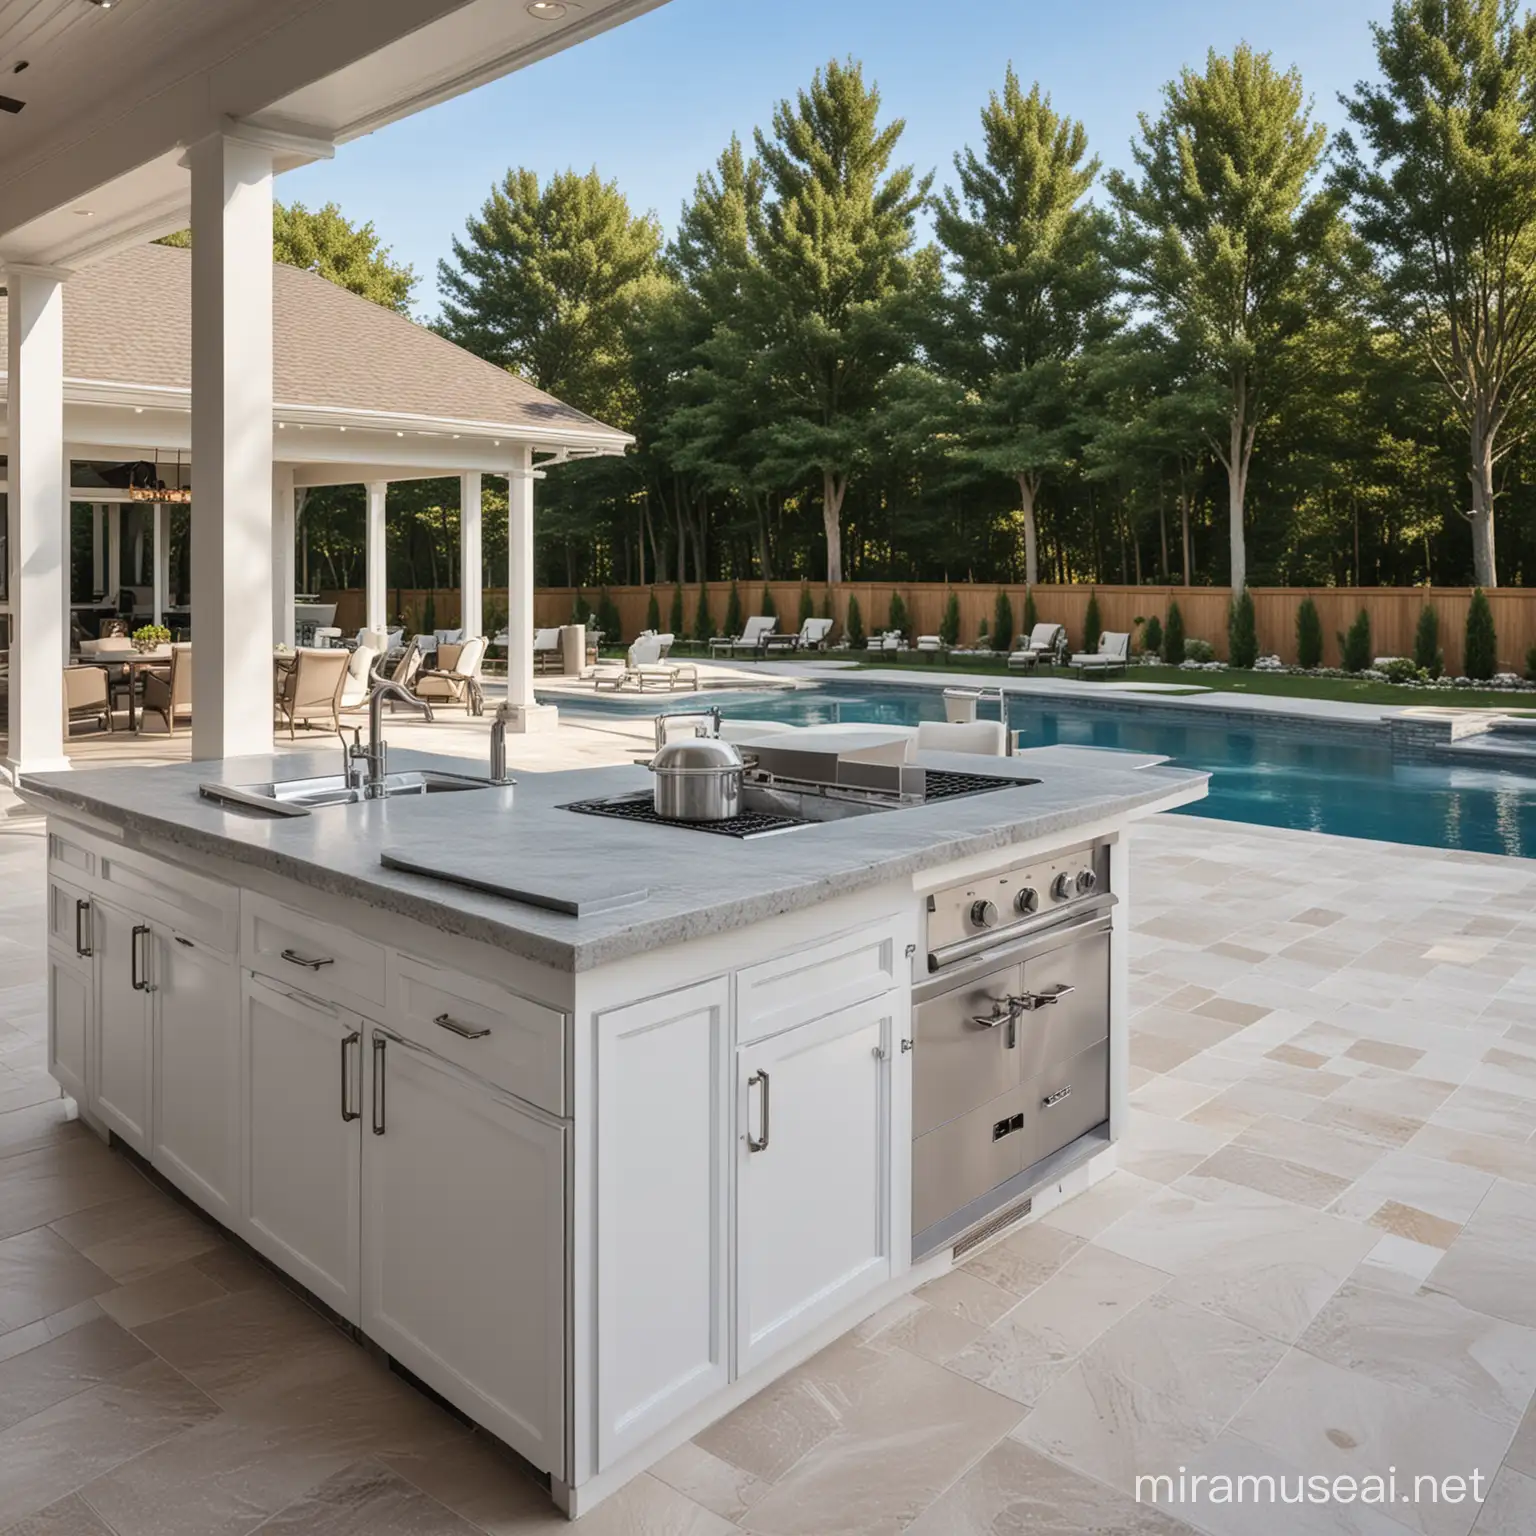 outdoor grill area with solid white color laminate cabinets, fancy pool, seating area, photo realistic, clean.